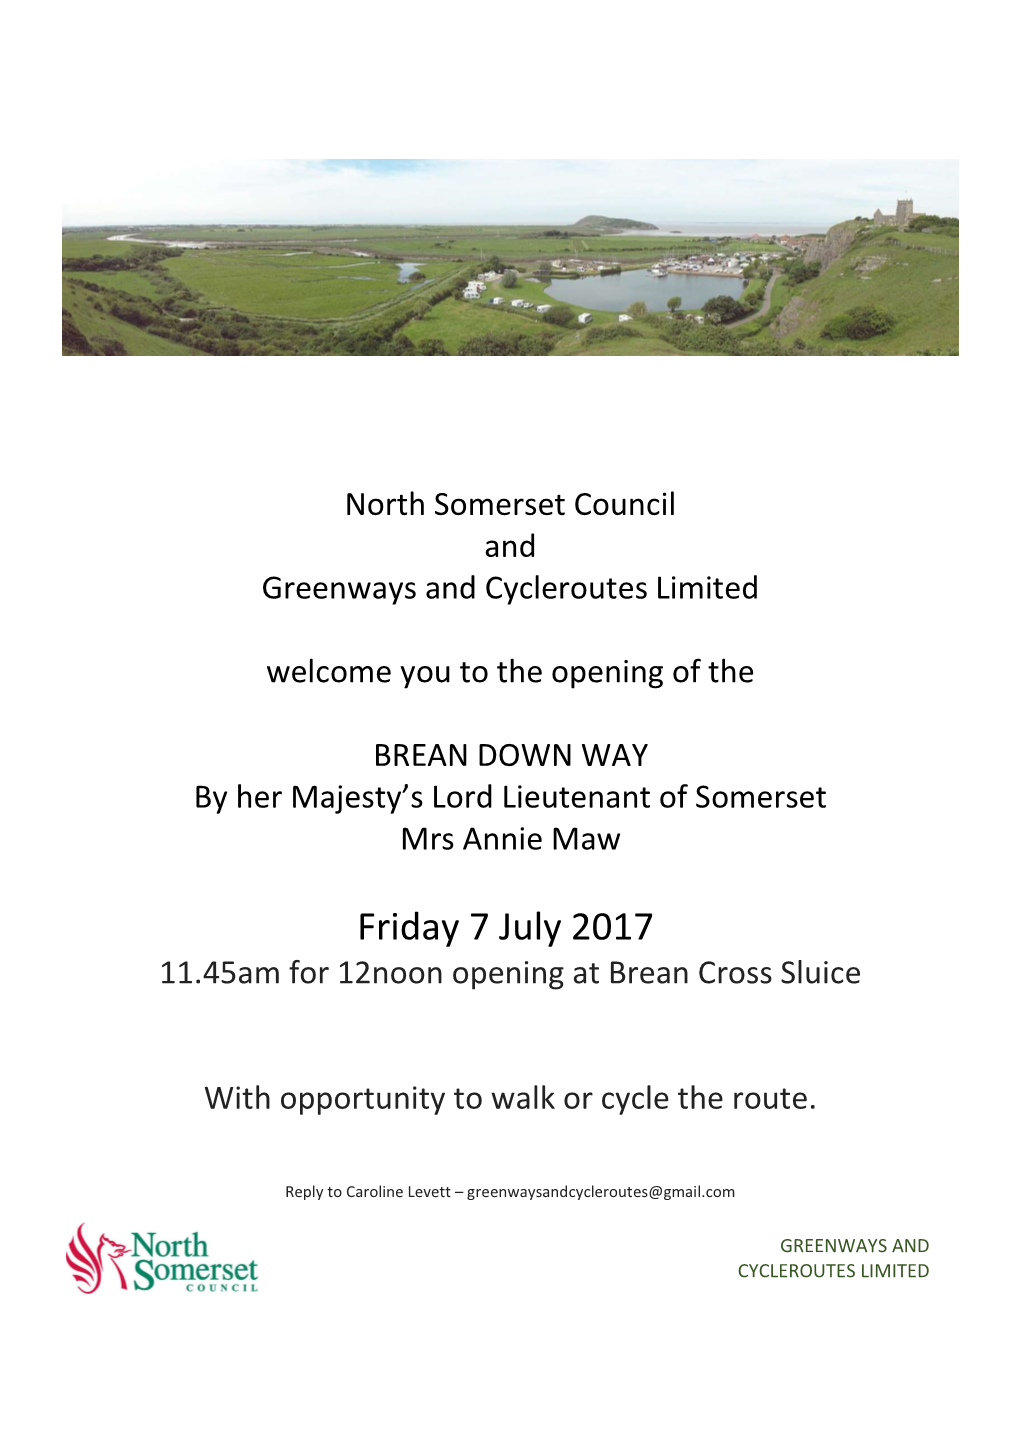 Friday 7 July 2017 11.45Am for 12Noon Opening at Brean Cross Sluice